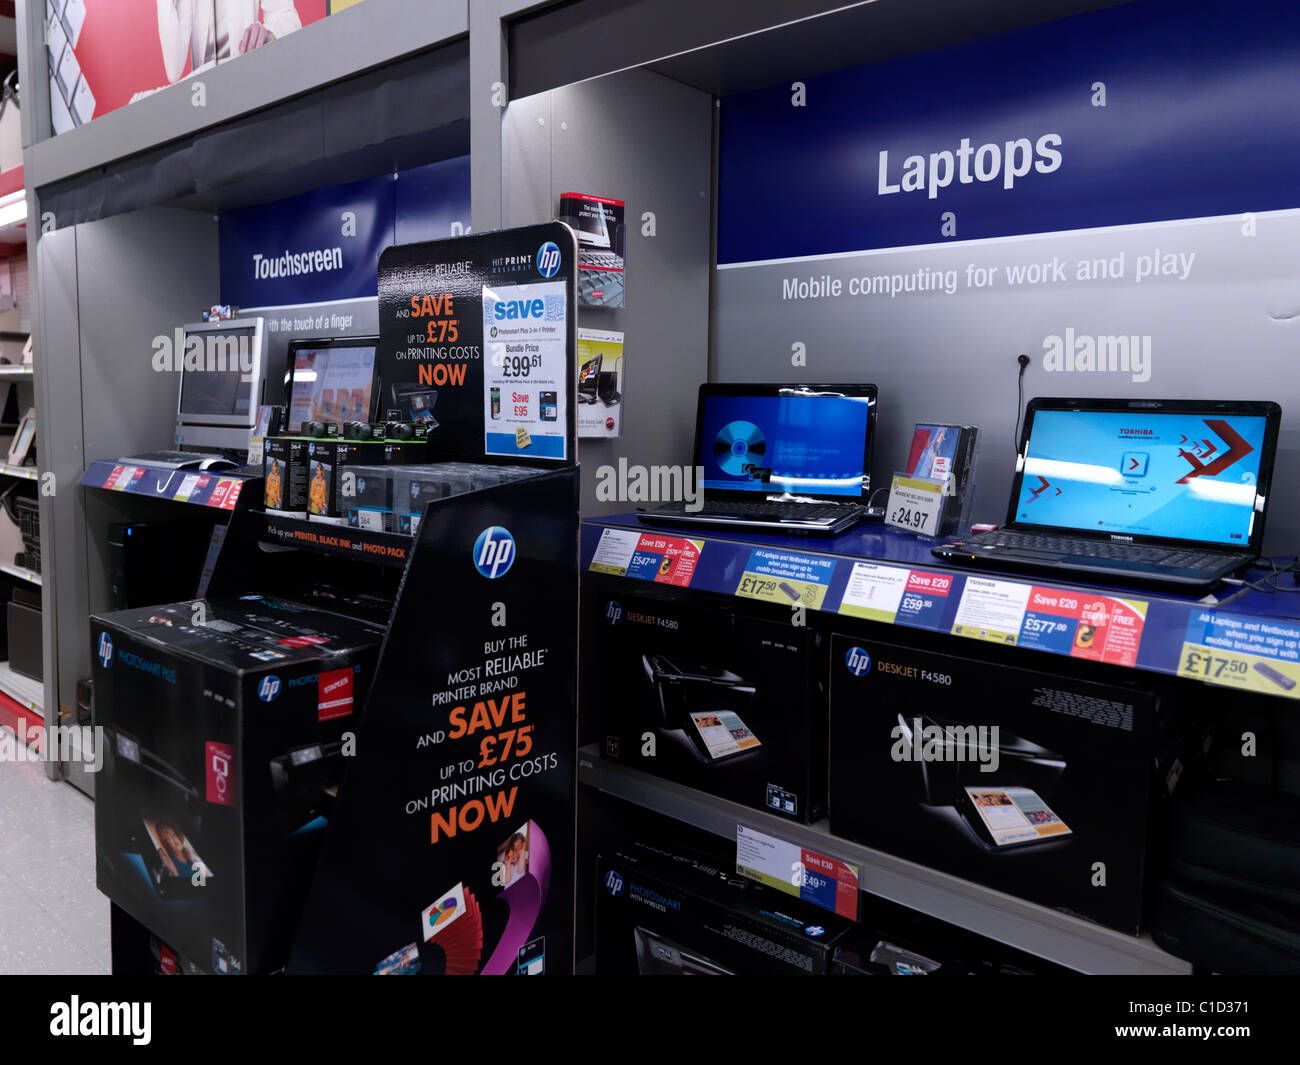 Laptops And Printers On Sale In Computer Shop England Stock Photo - Alamy